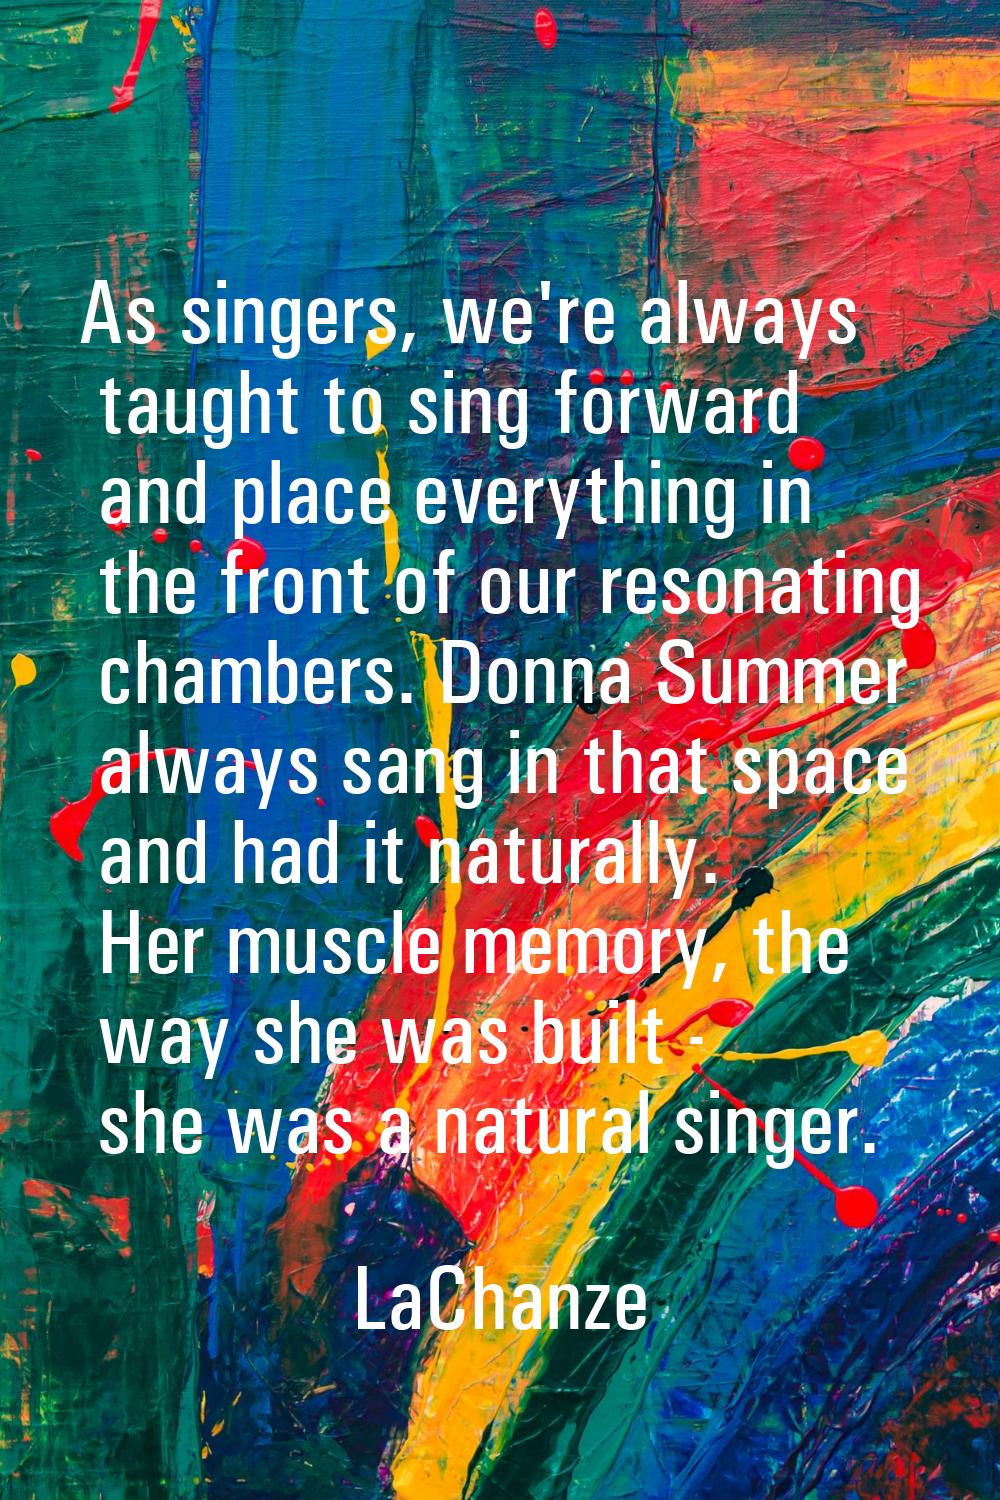 As singers, we're always taught to sing forward and place everything in the front of our resonating